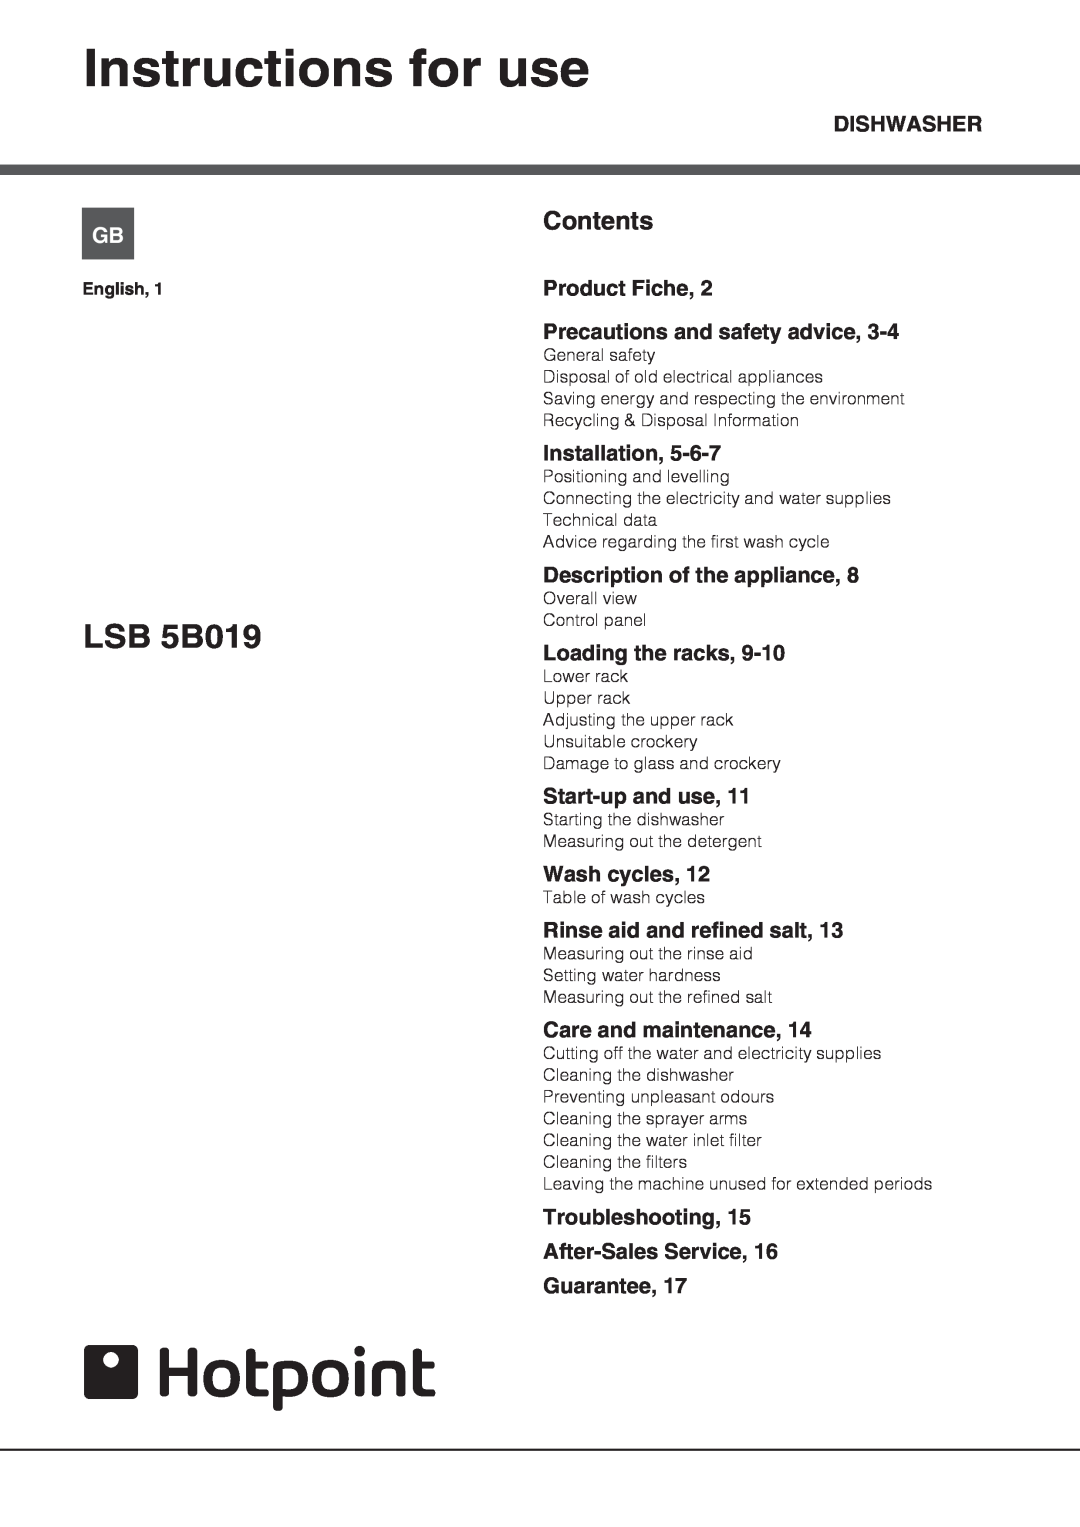 Hotpoint LSB 5B019 manual Instructions for use, Contents 